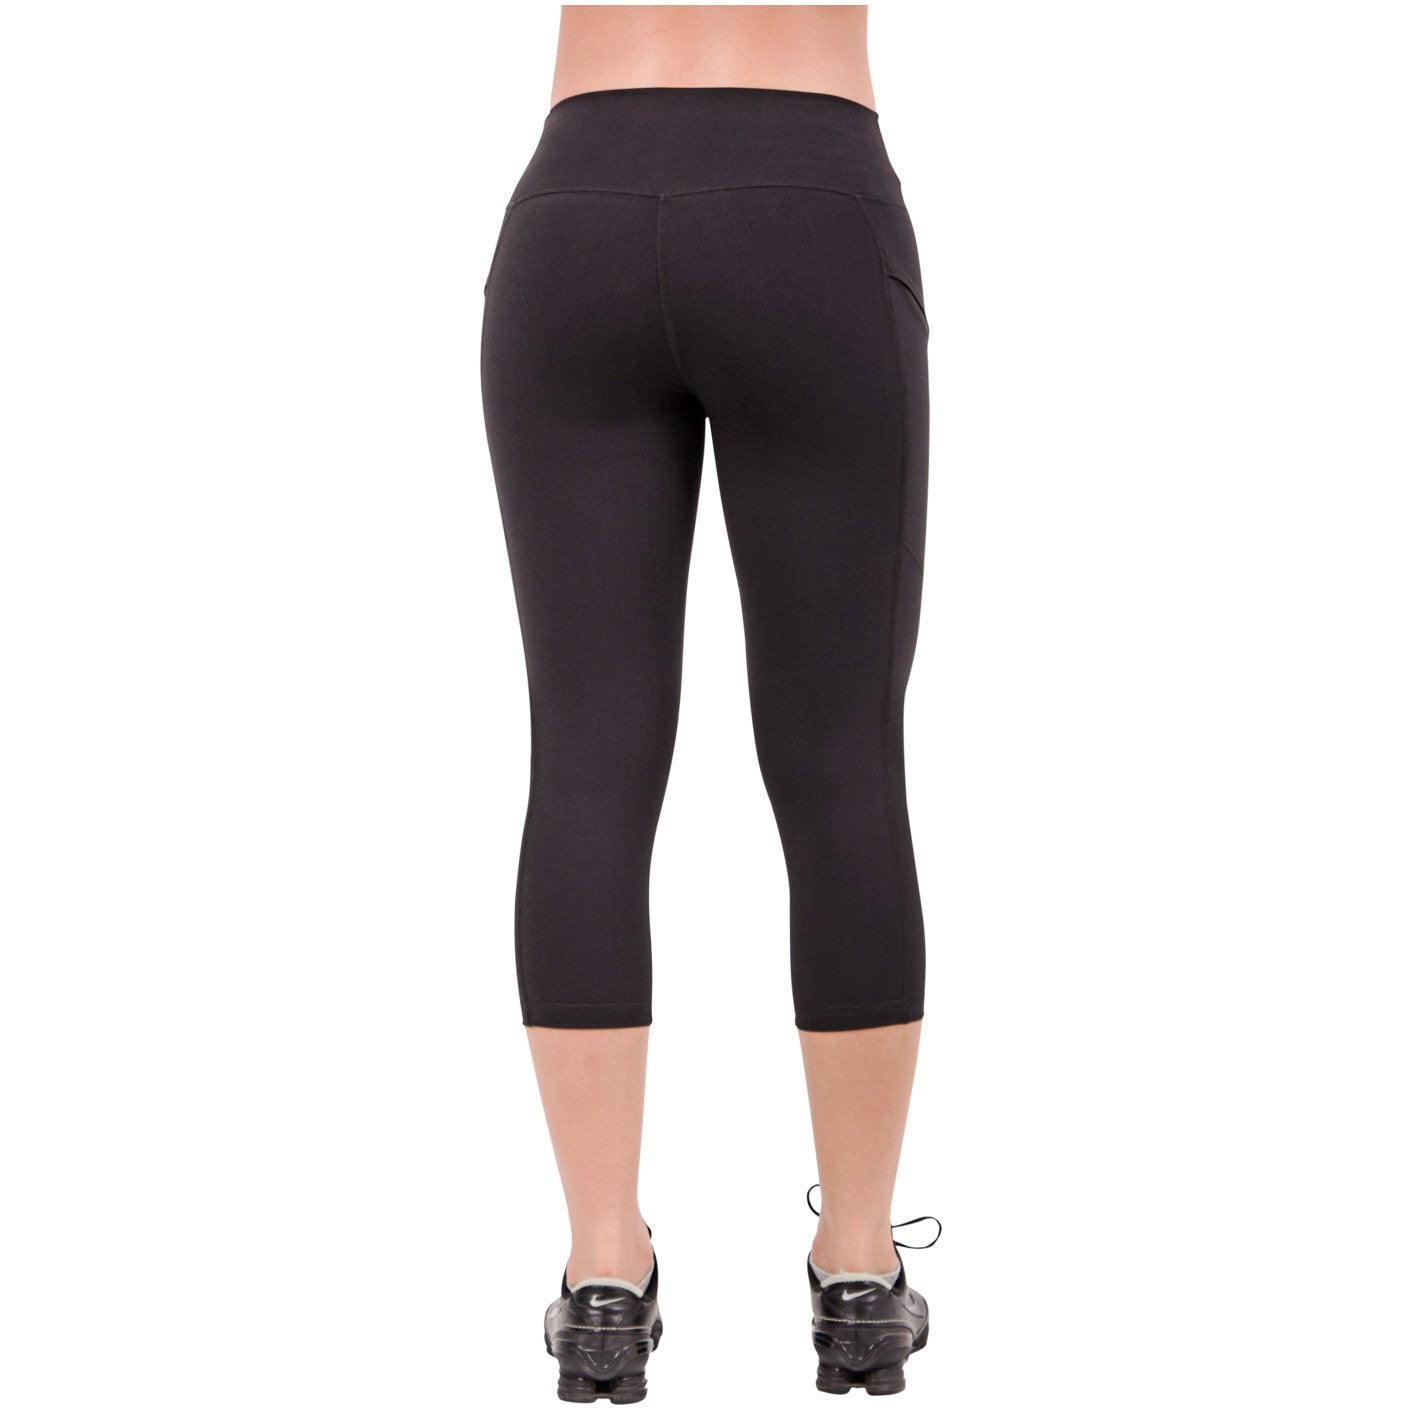 FLEXMEE Activewear: 946066 - Active Tummy Control Leggings for Women -  Showmee Store